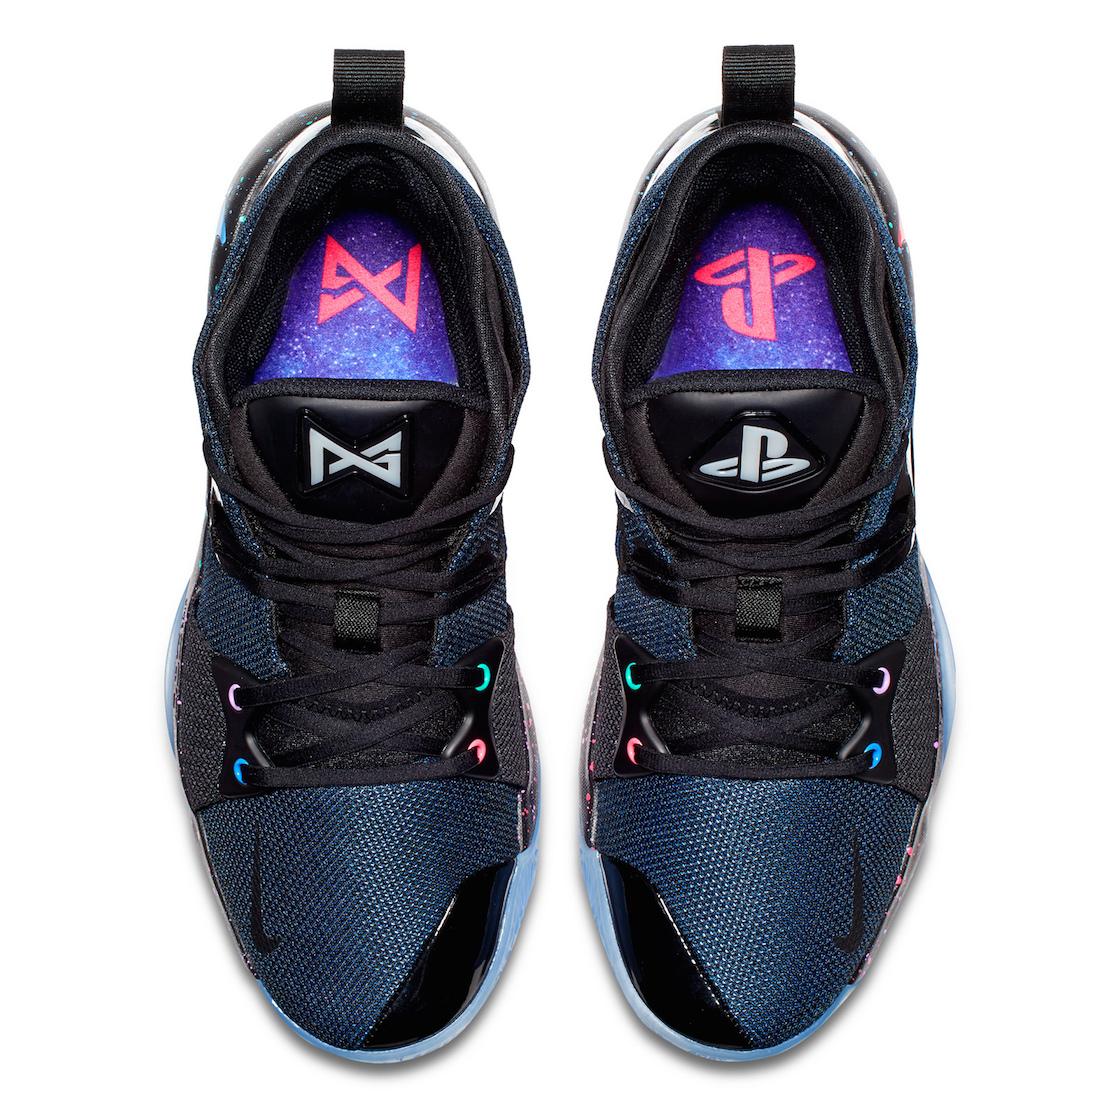 ps4 shoes for sale